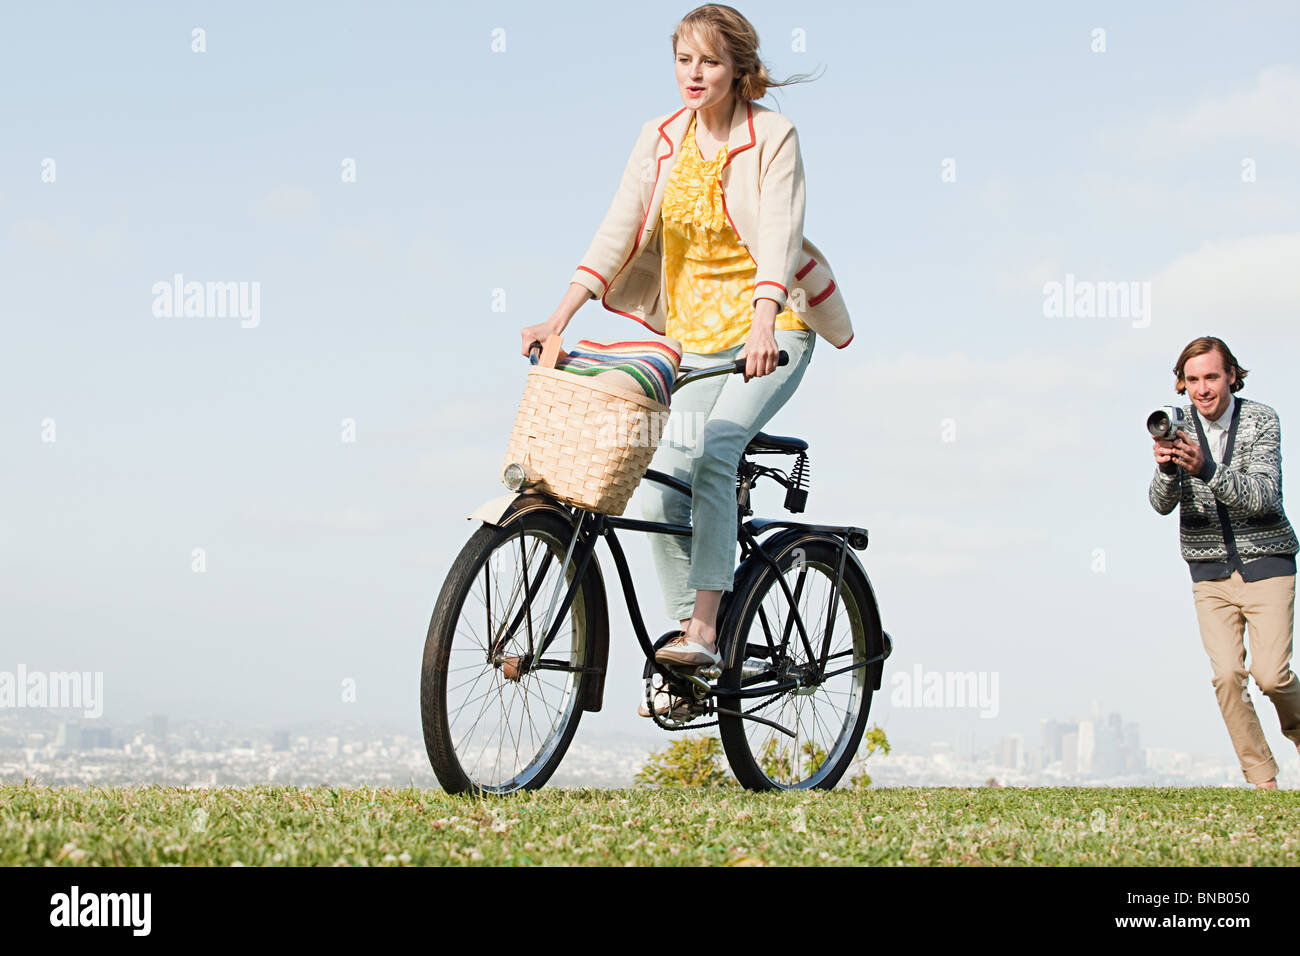 Man filming girlfriend riding a bicycle Stock Photo